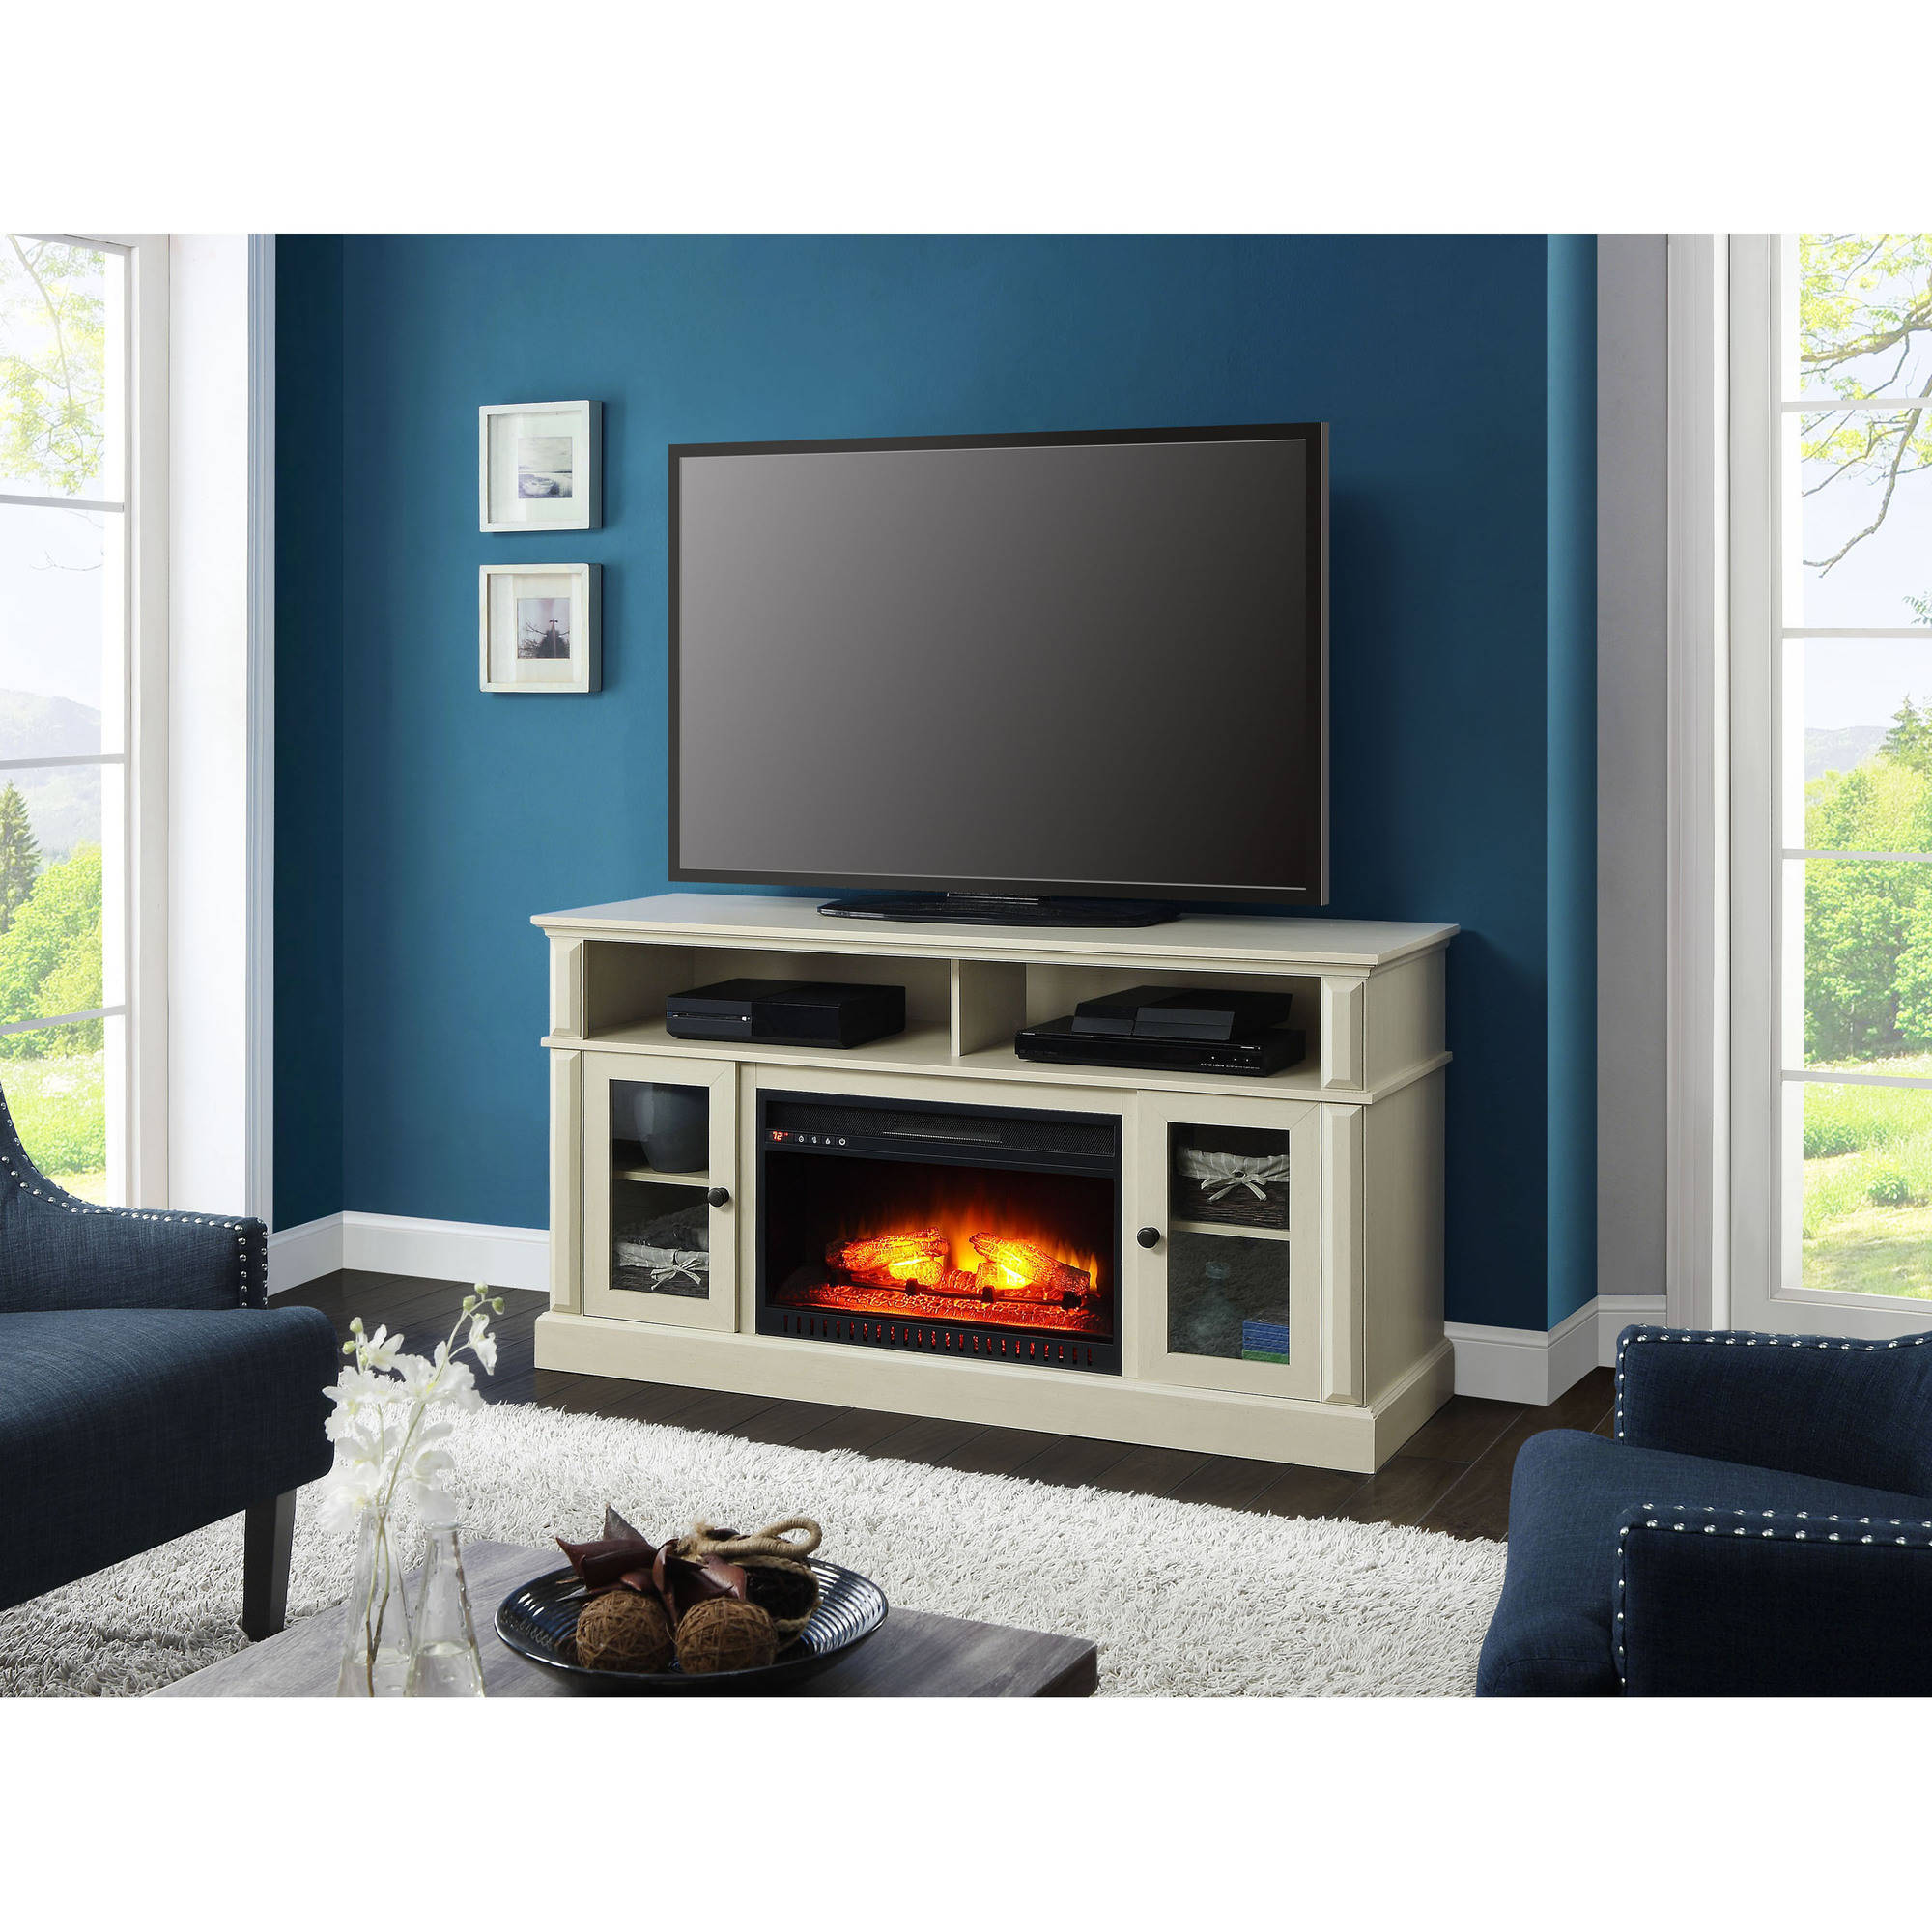 65 In Tv Stand with Fireplace Inspirational Whalen Barston Media Fireplace for Tv S Up to 70 Multiple